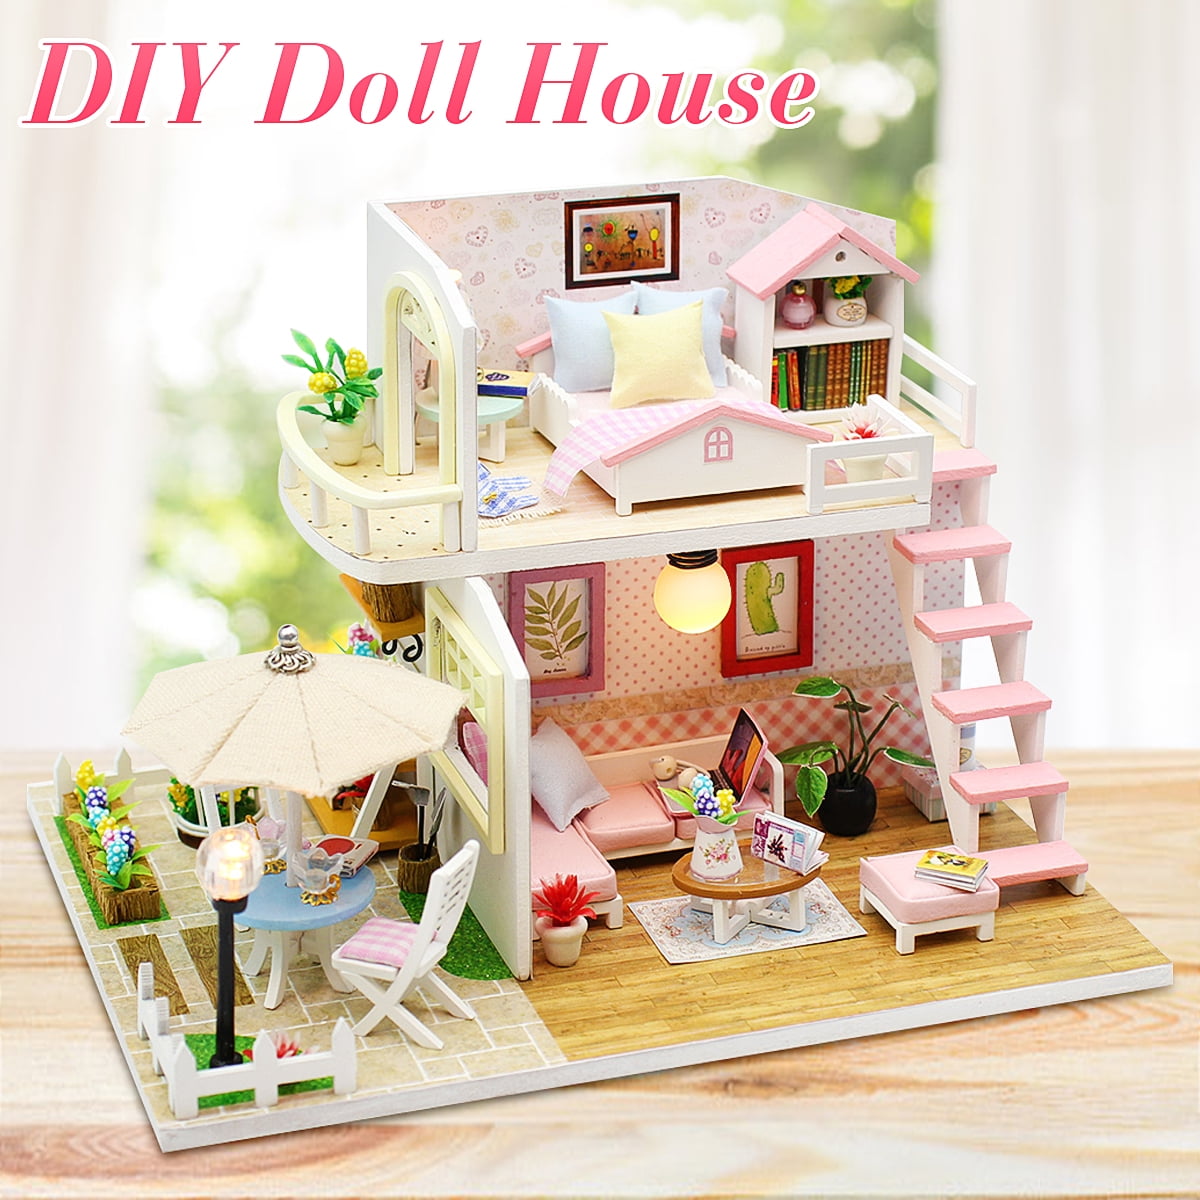 Details about   Miniature Dollhouse With Dust Cover And Light For Children's Toy Wooden Material 